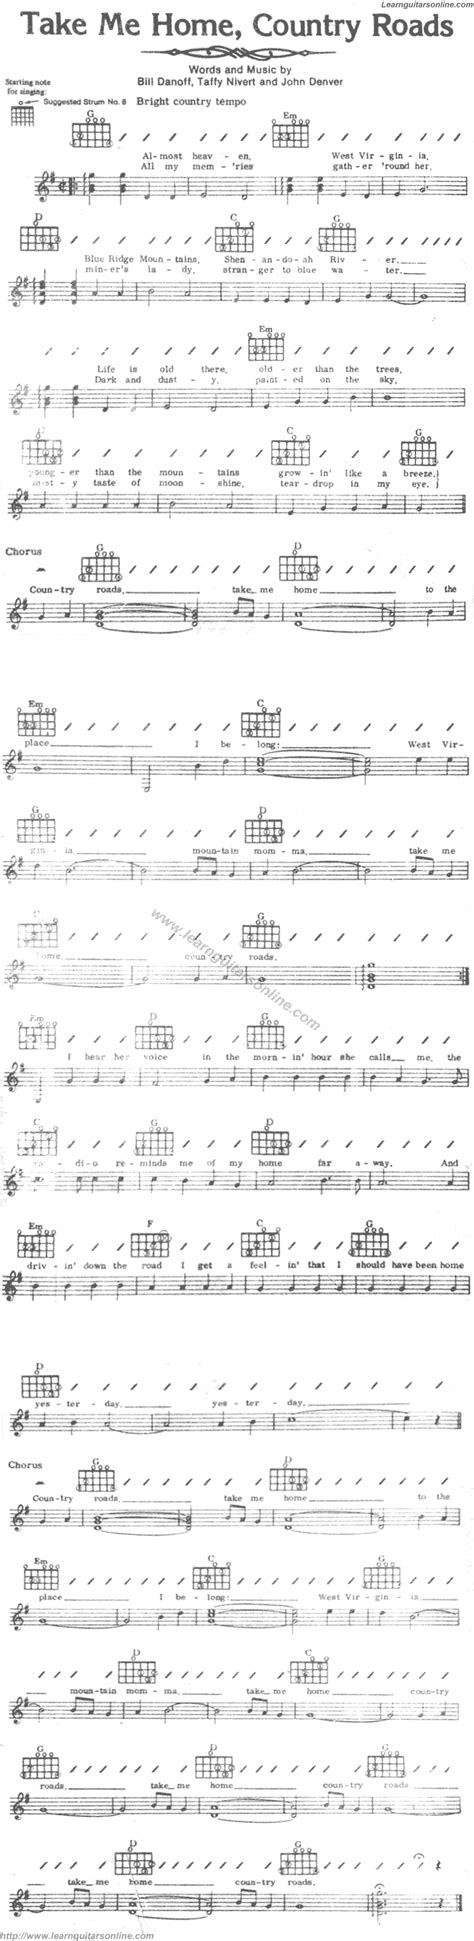 Take Me Home Country Roads by John Denver Guitar Tabs ...